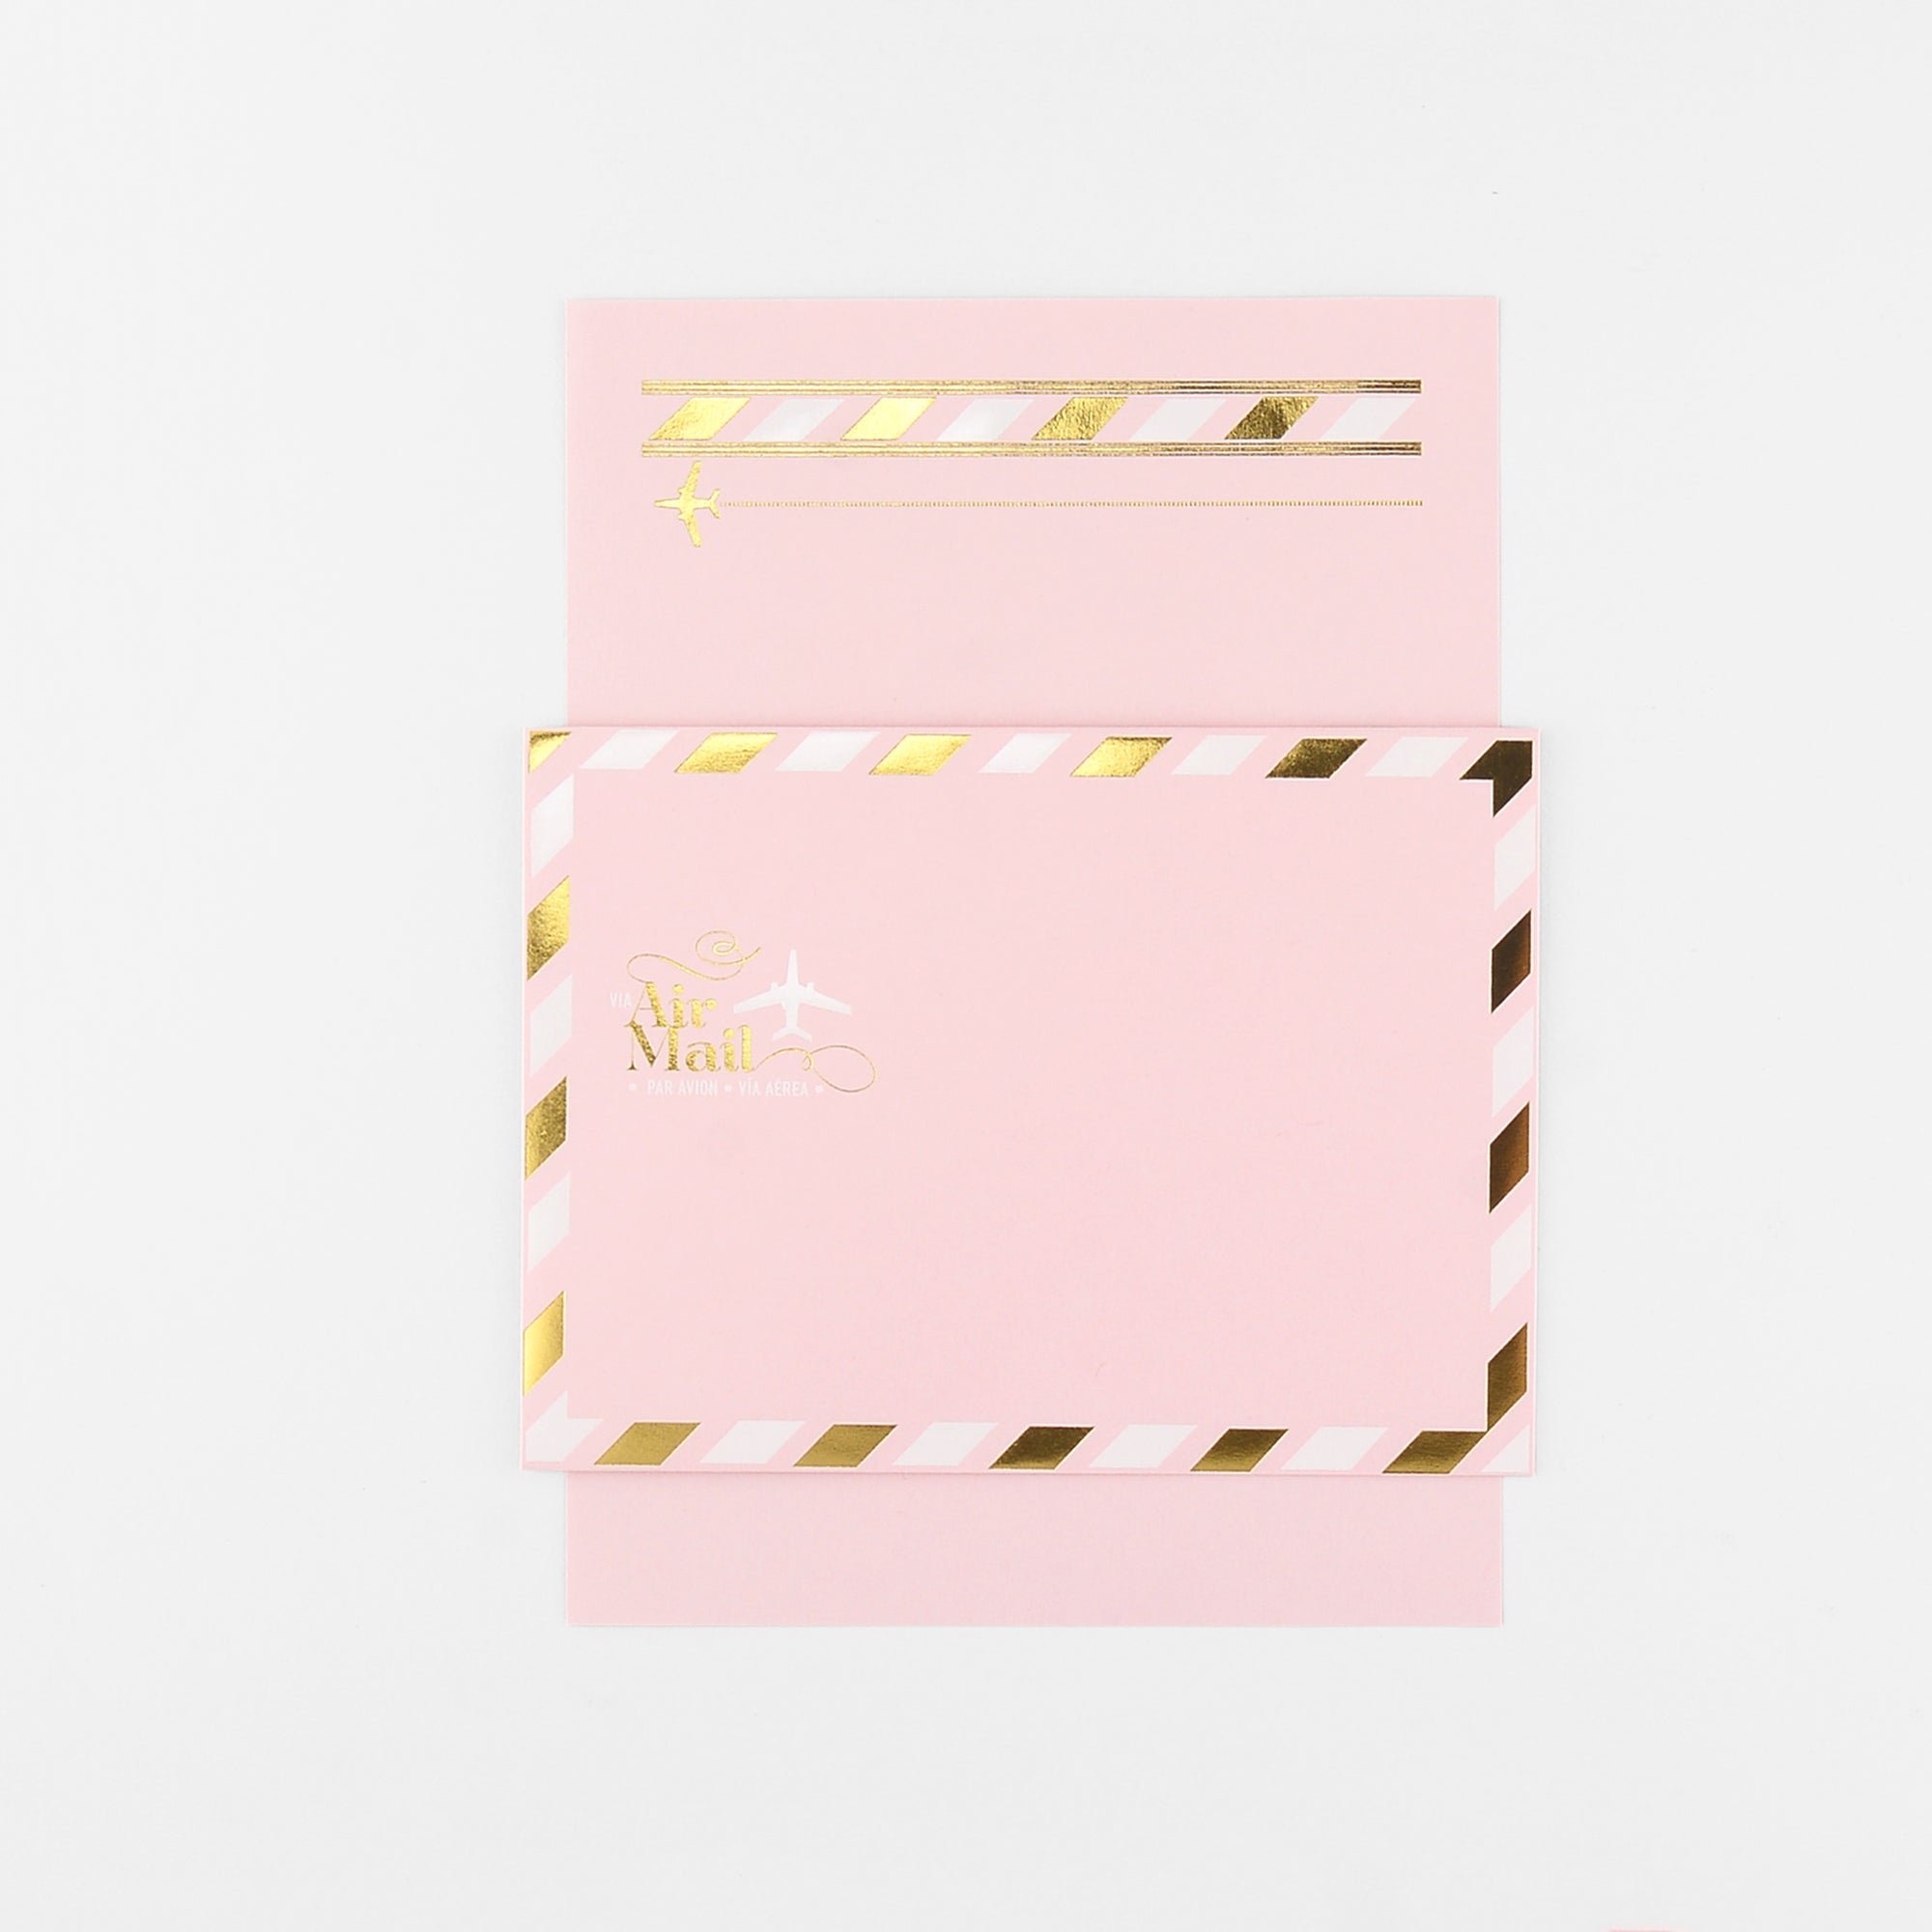 LA Paper Lover Airmail Metallic Gold + White On Pink 